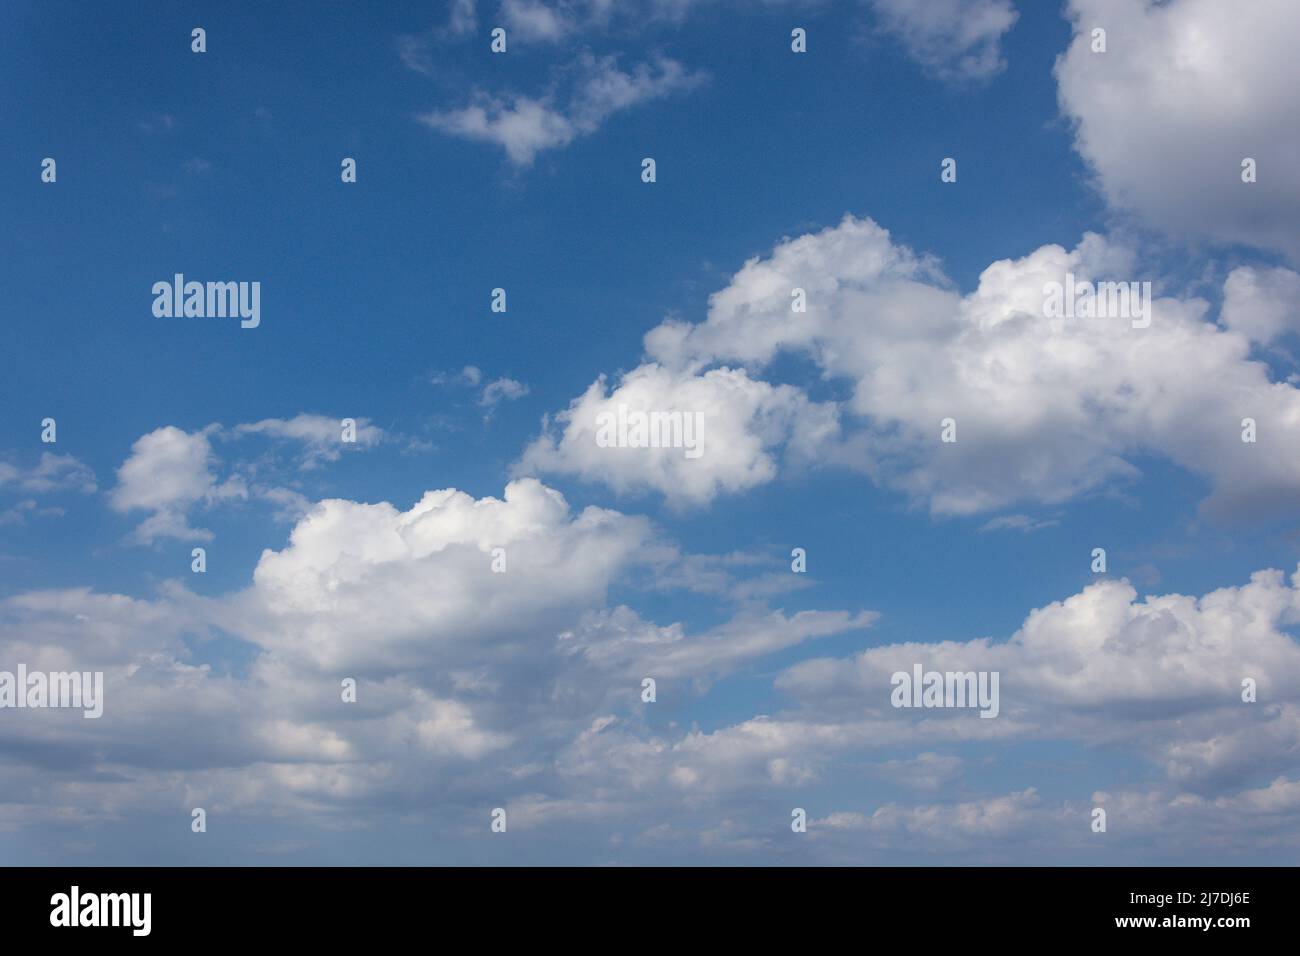 Partly cloudy skies from deck of Marella Explorer II cruise ship, Caribbean Sea, Greater Antilles, Caribbean Stock Photo